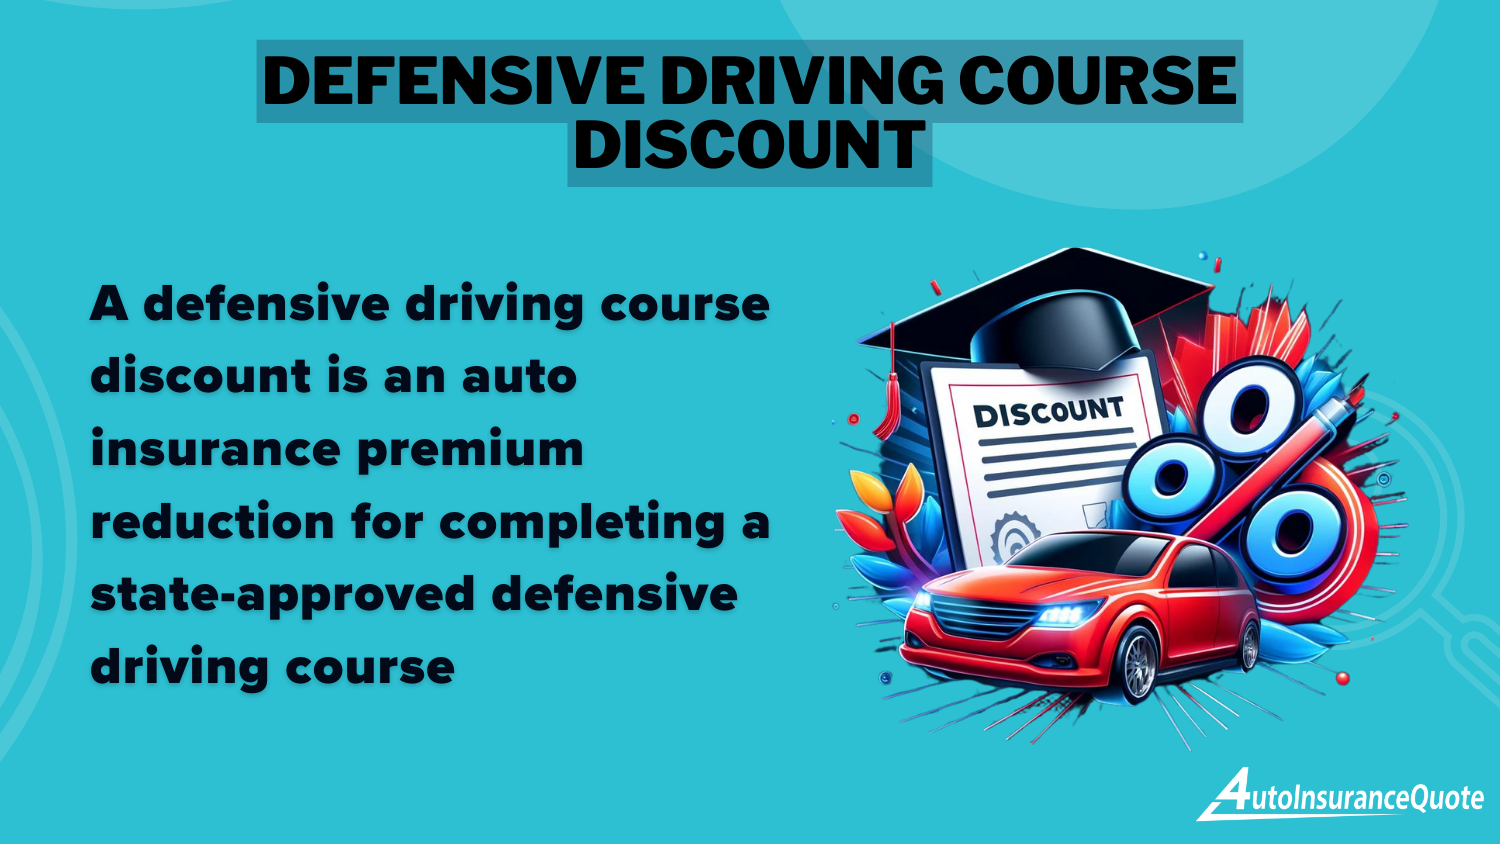 CURE Auto Insurance Review: Defensive Driving Course Discount Definition Card